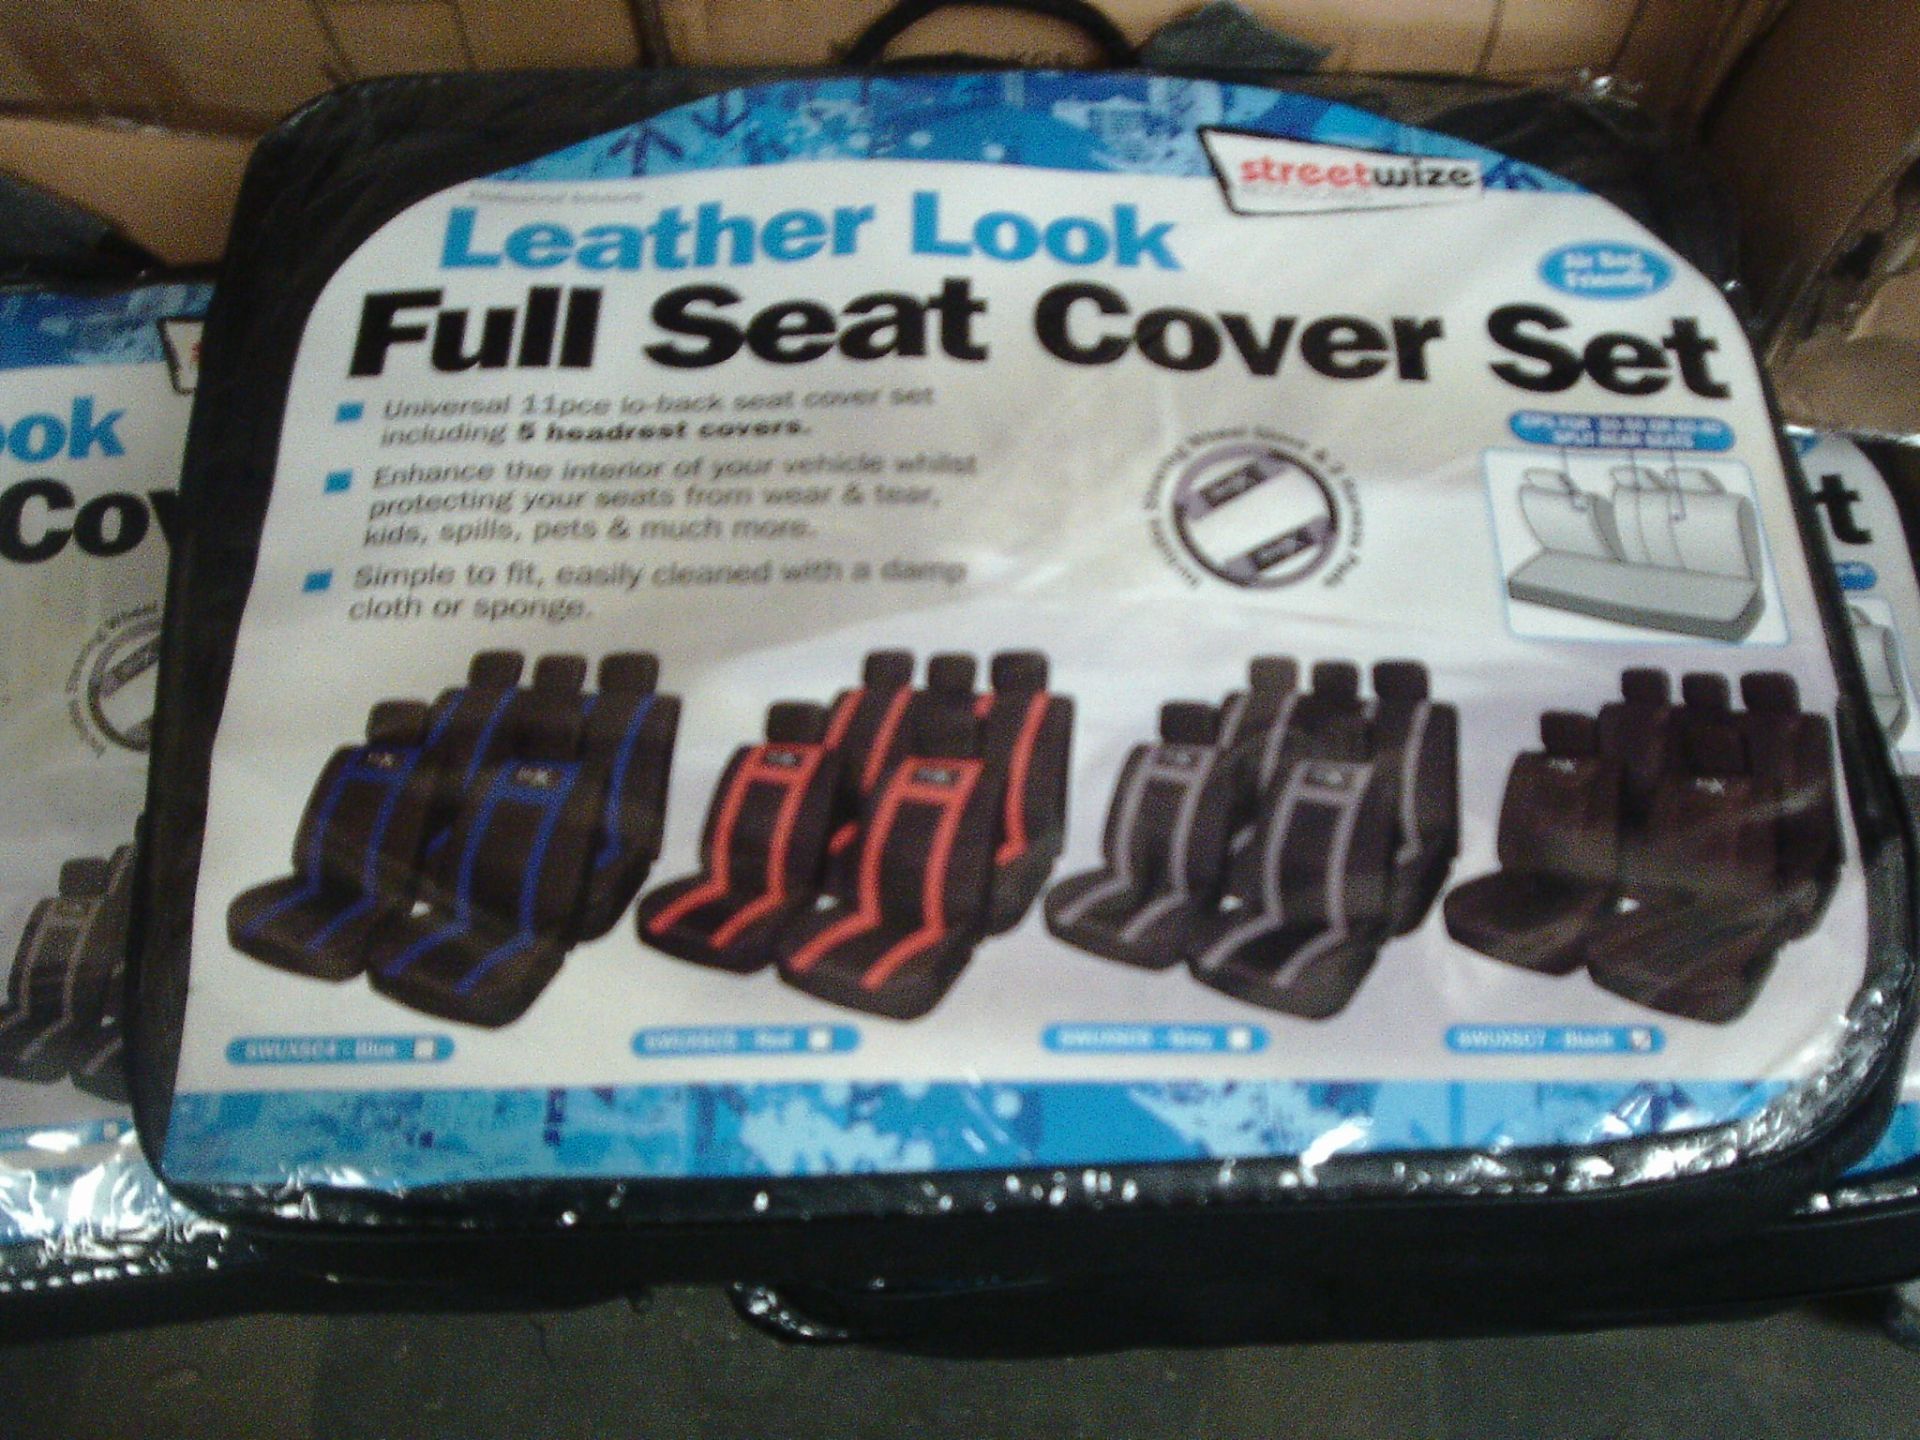 5pcs x  Leather look  full seat cover set - bagged rrp £34.99